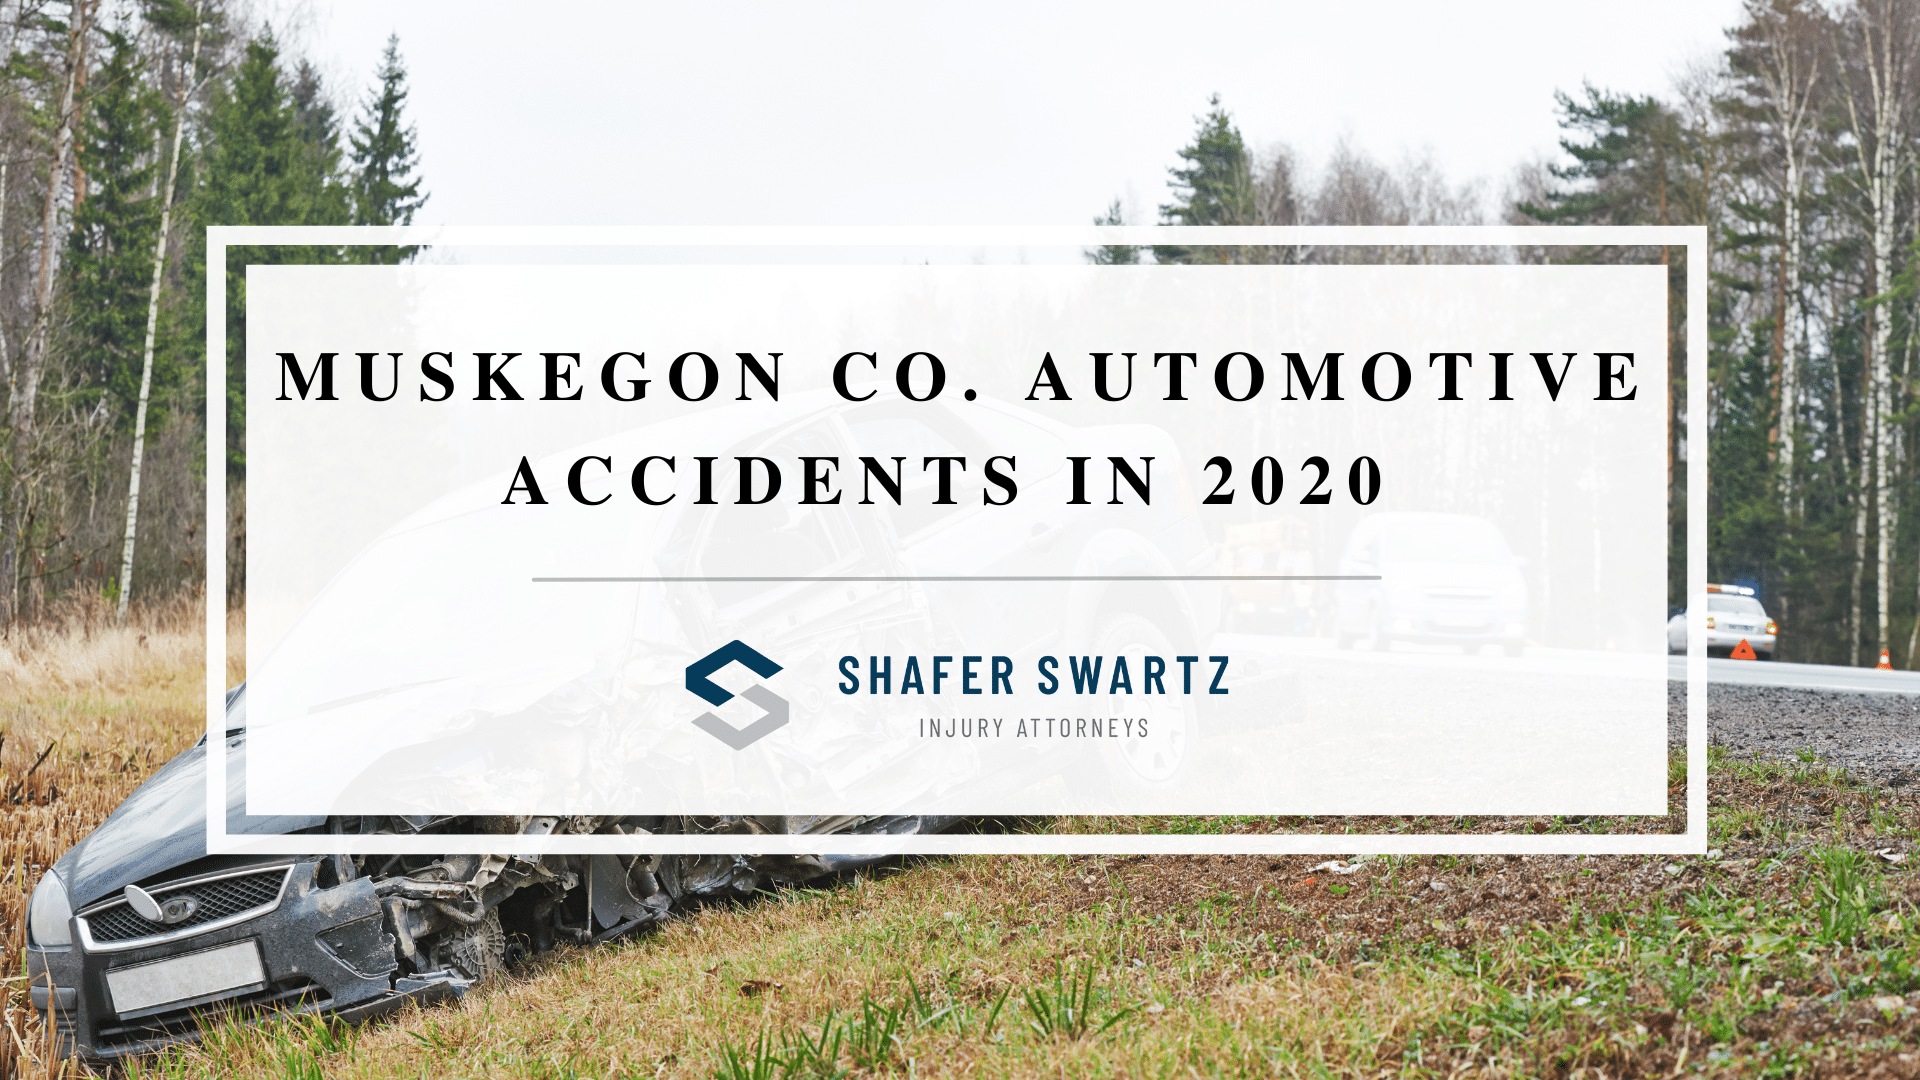 Featured image of Muskegon co. automotive accidents in 2020 